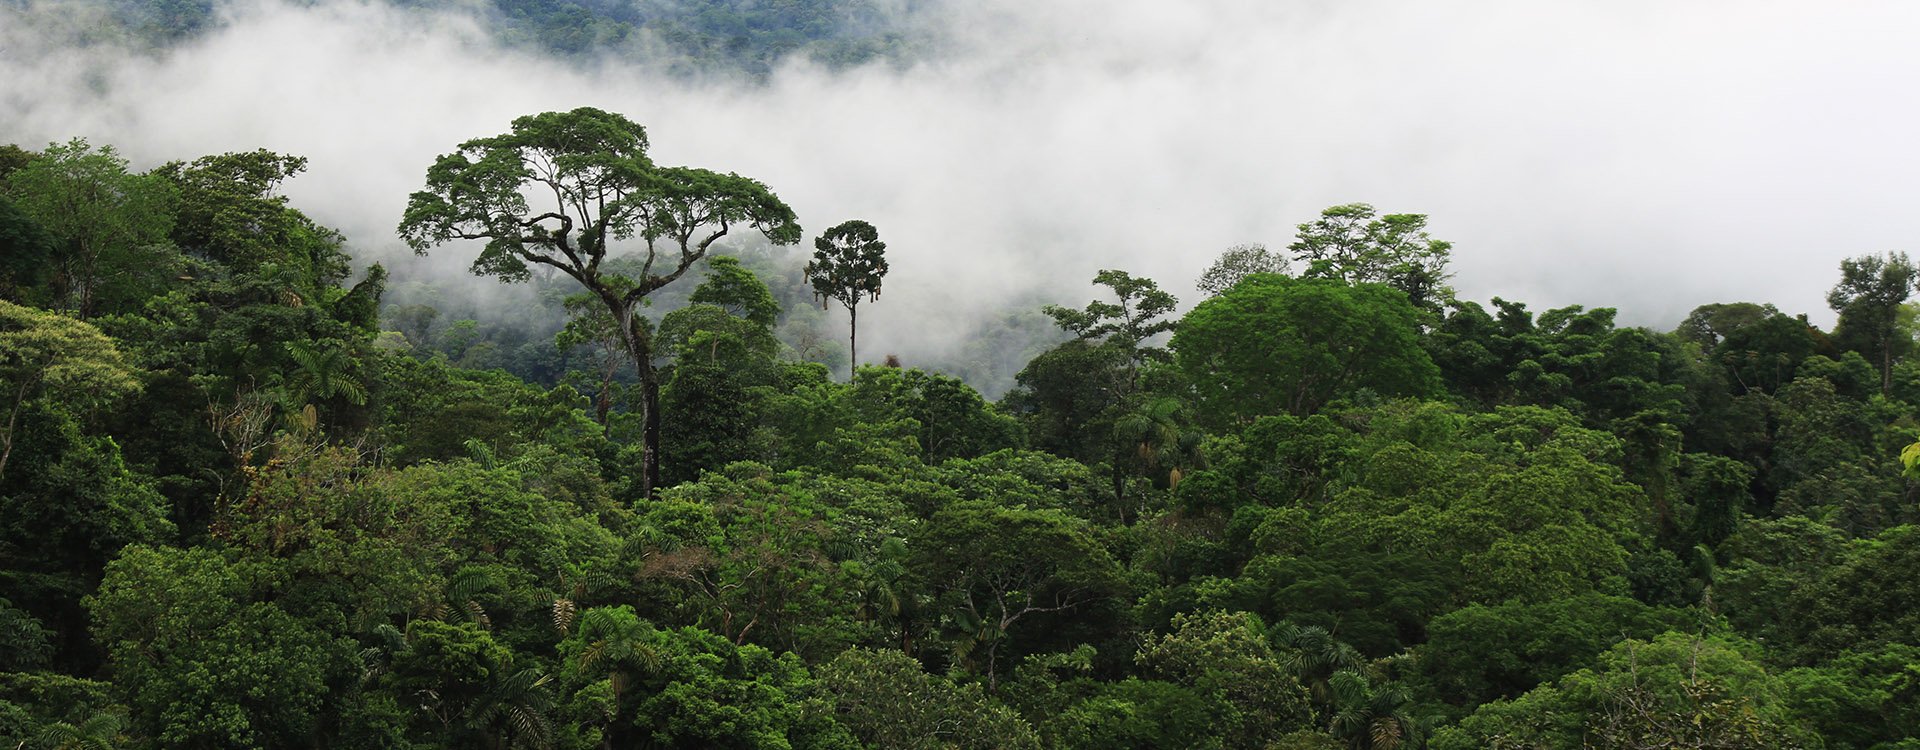 The amazon rainforest with clouds covering the major part of the forest